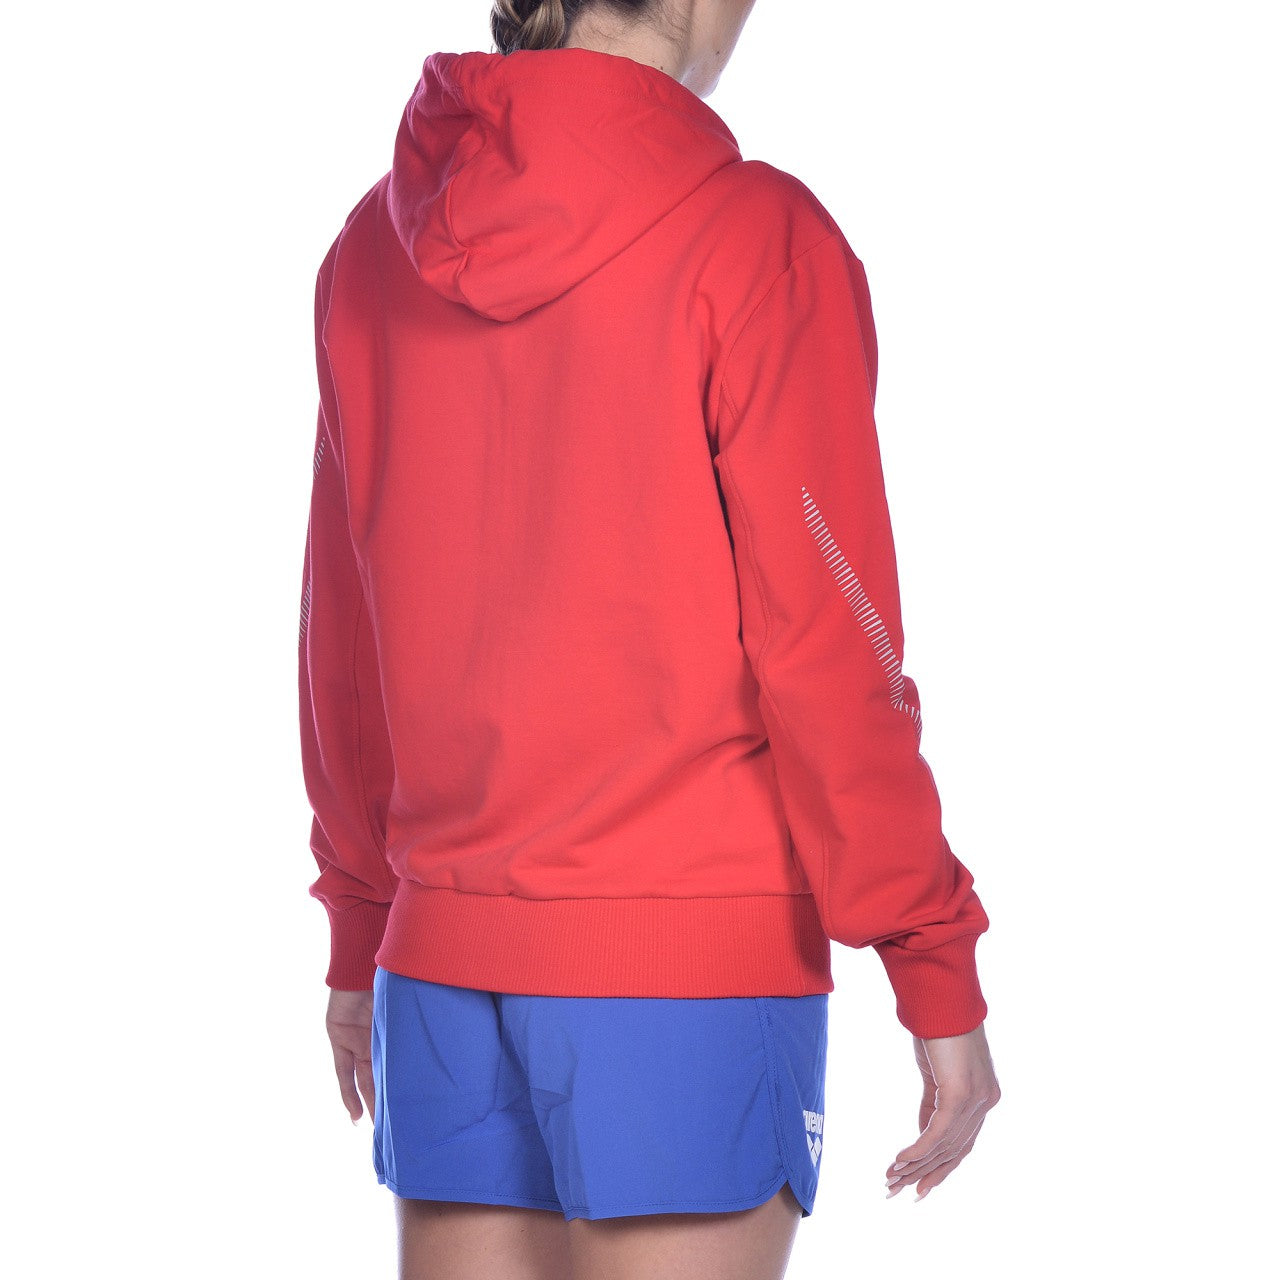 Tl Hooded Jacket red